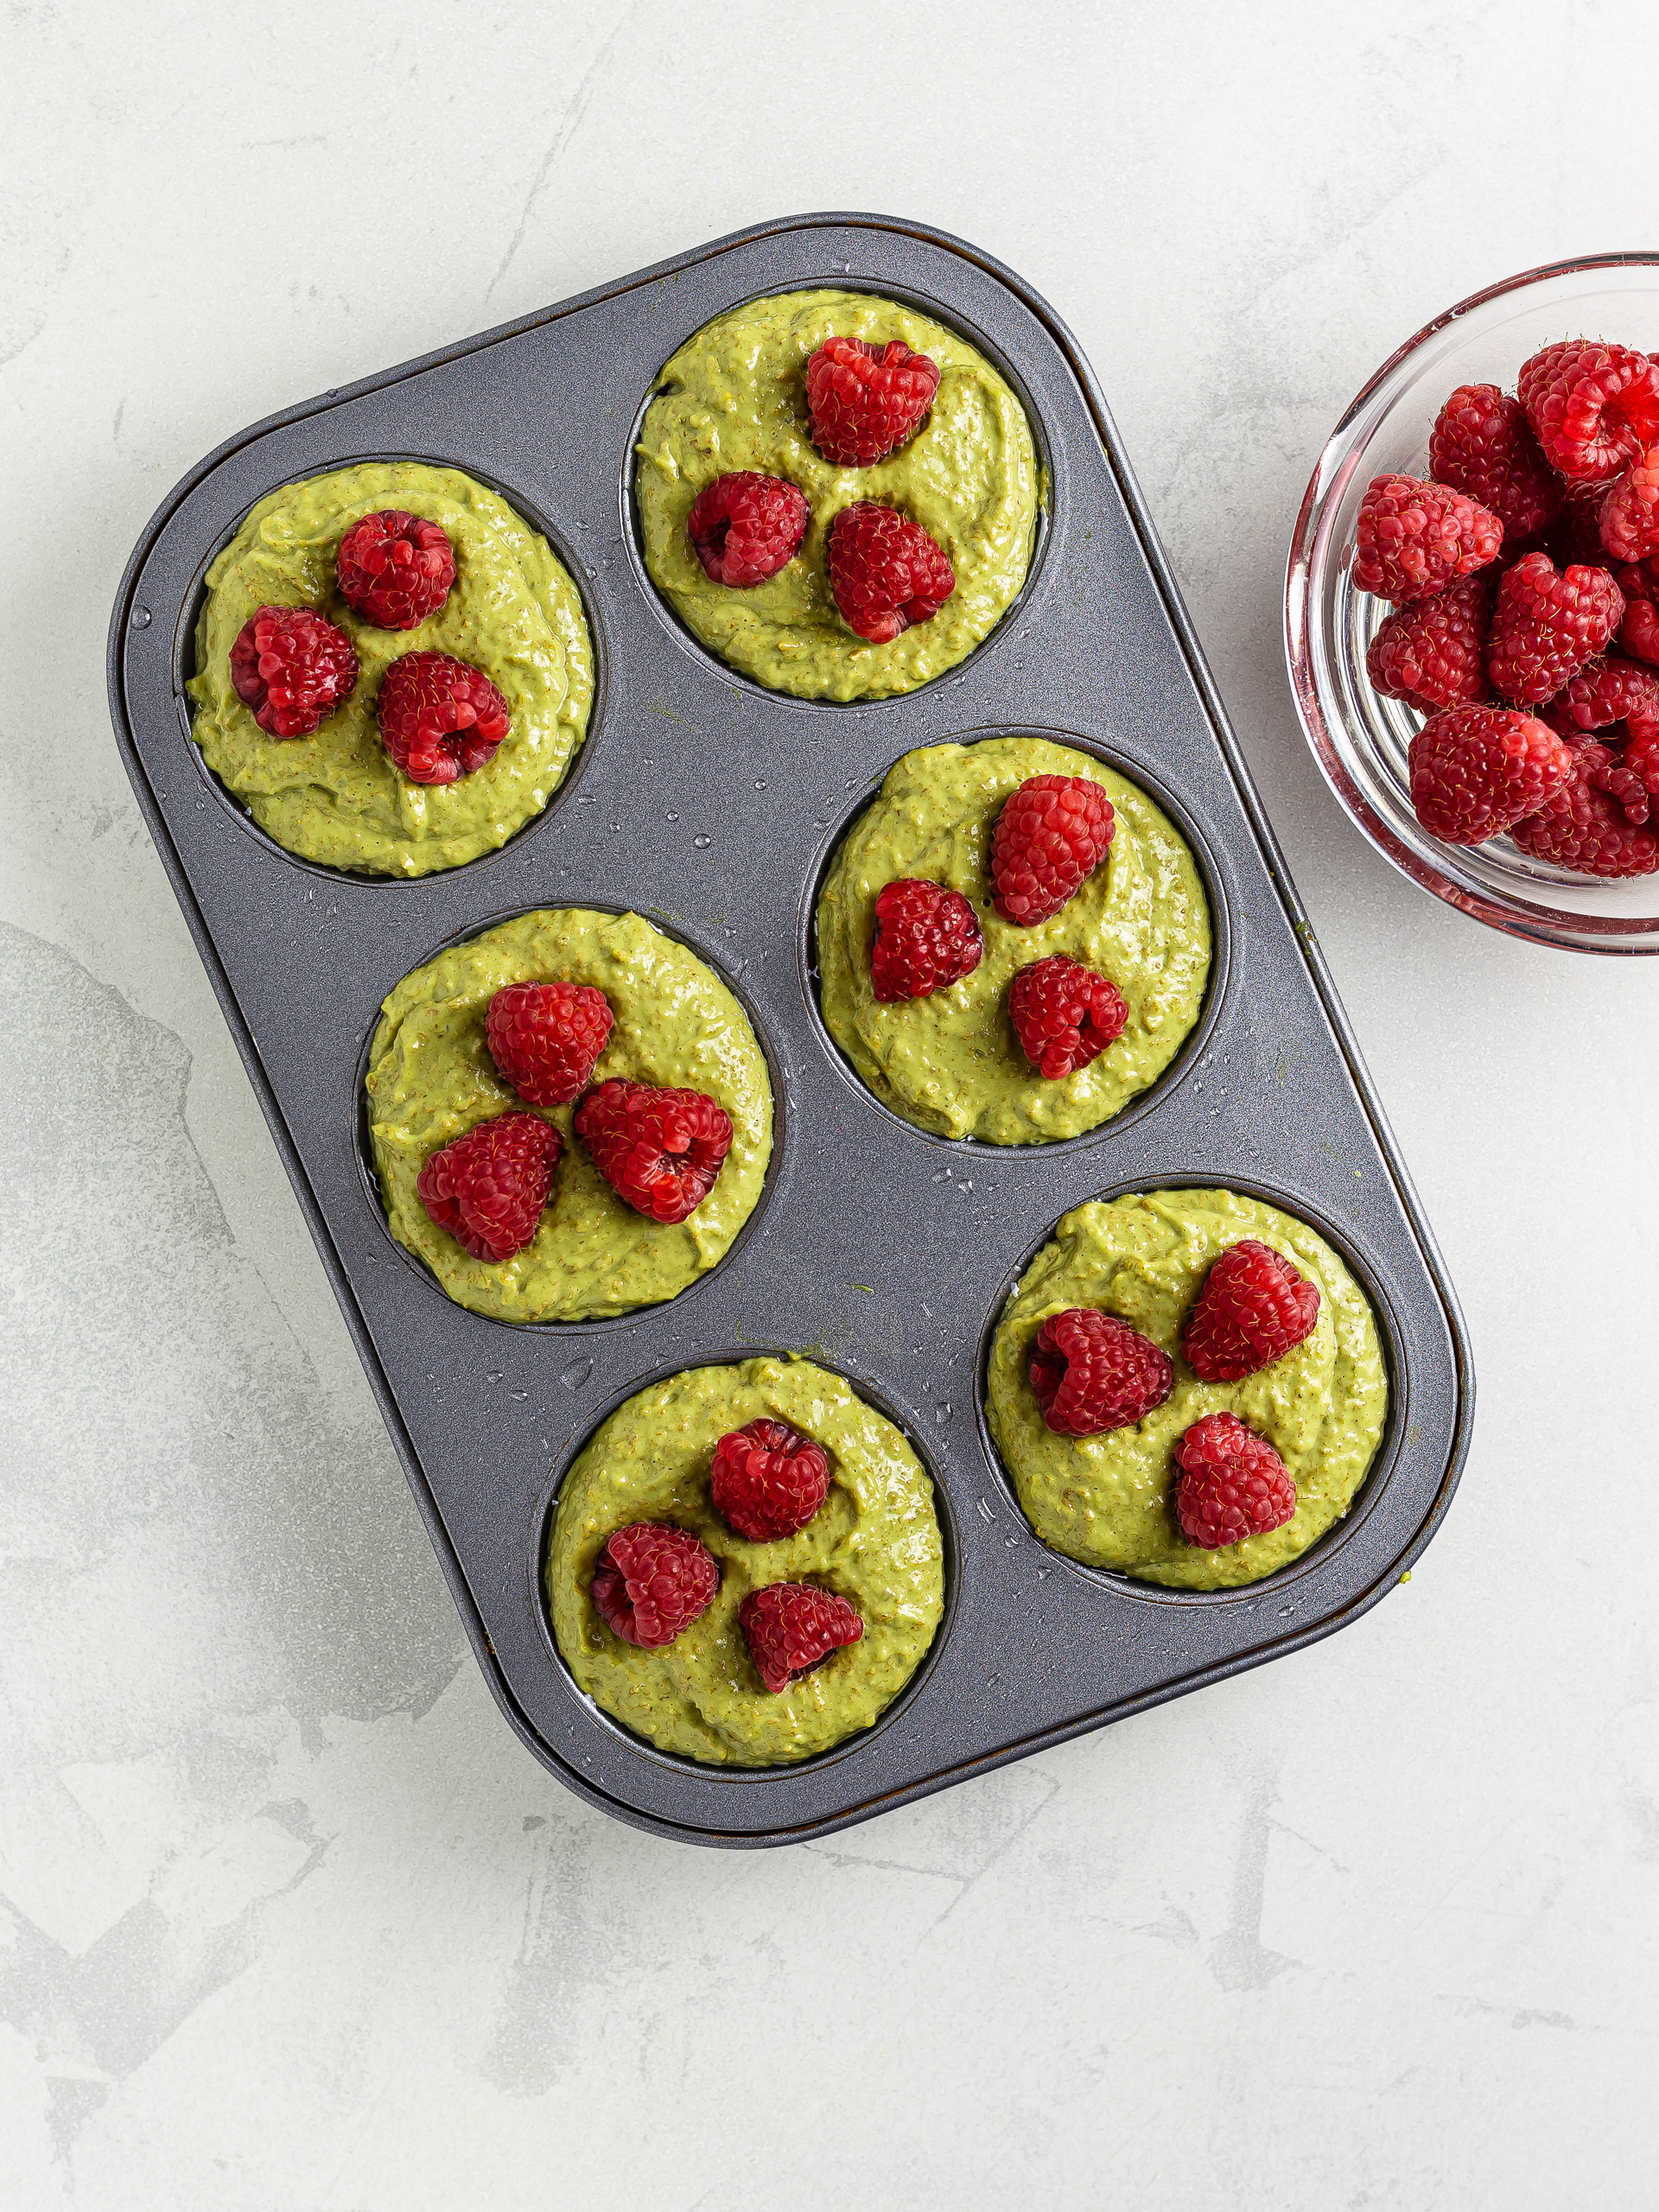 matcha muffins batter in a muffin tray with raspberries